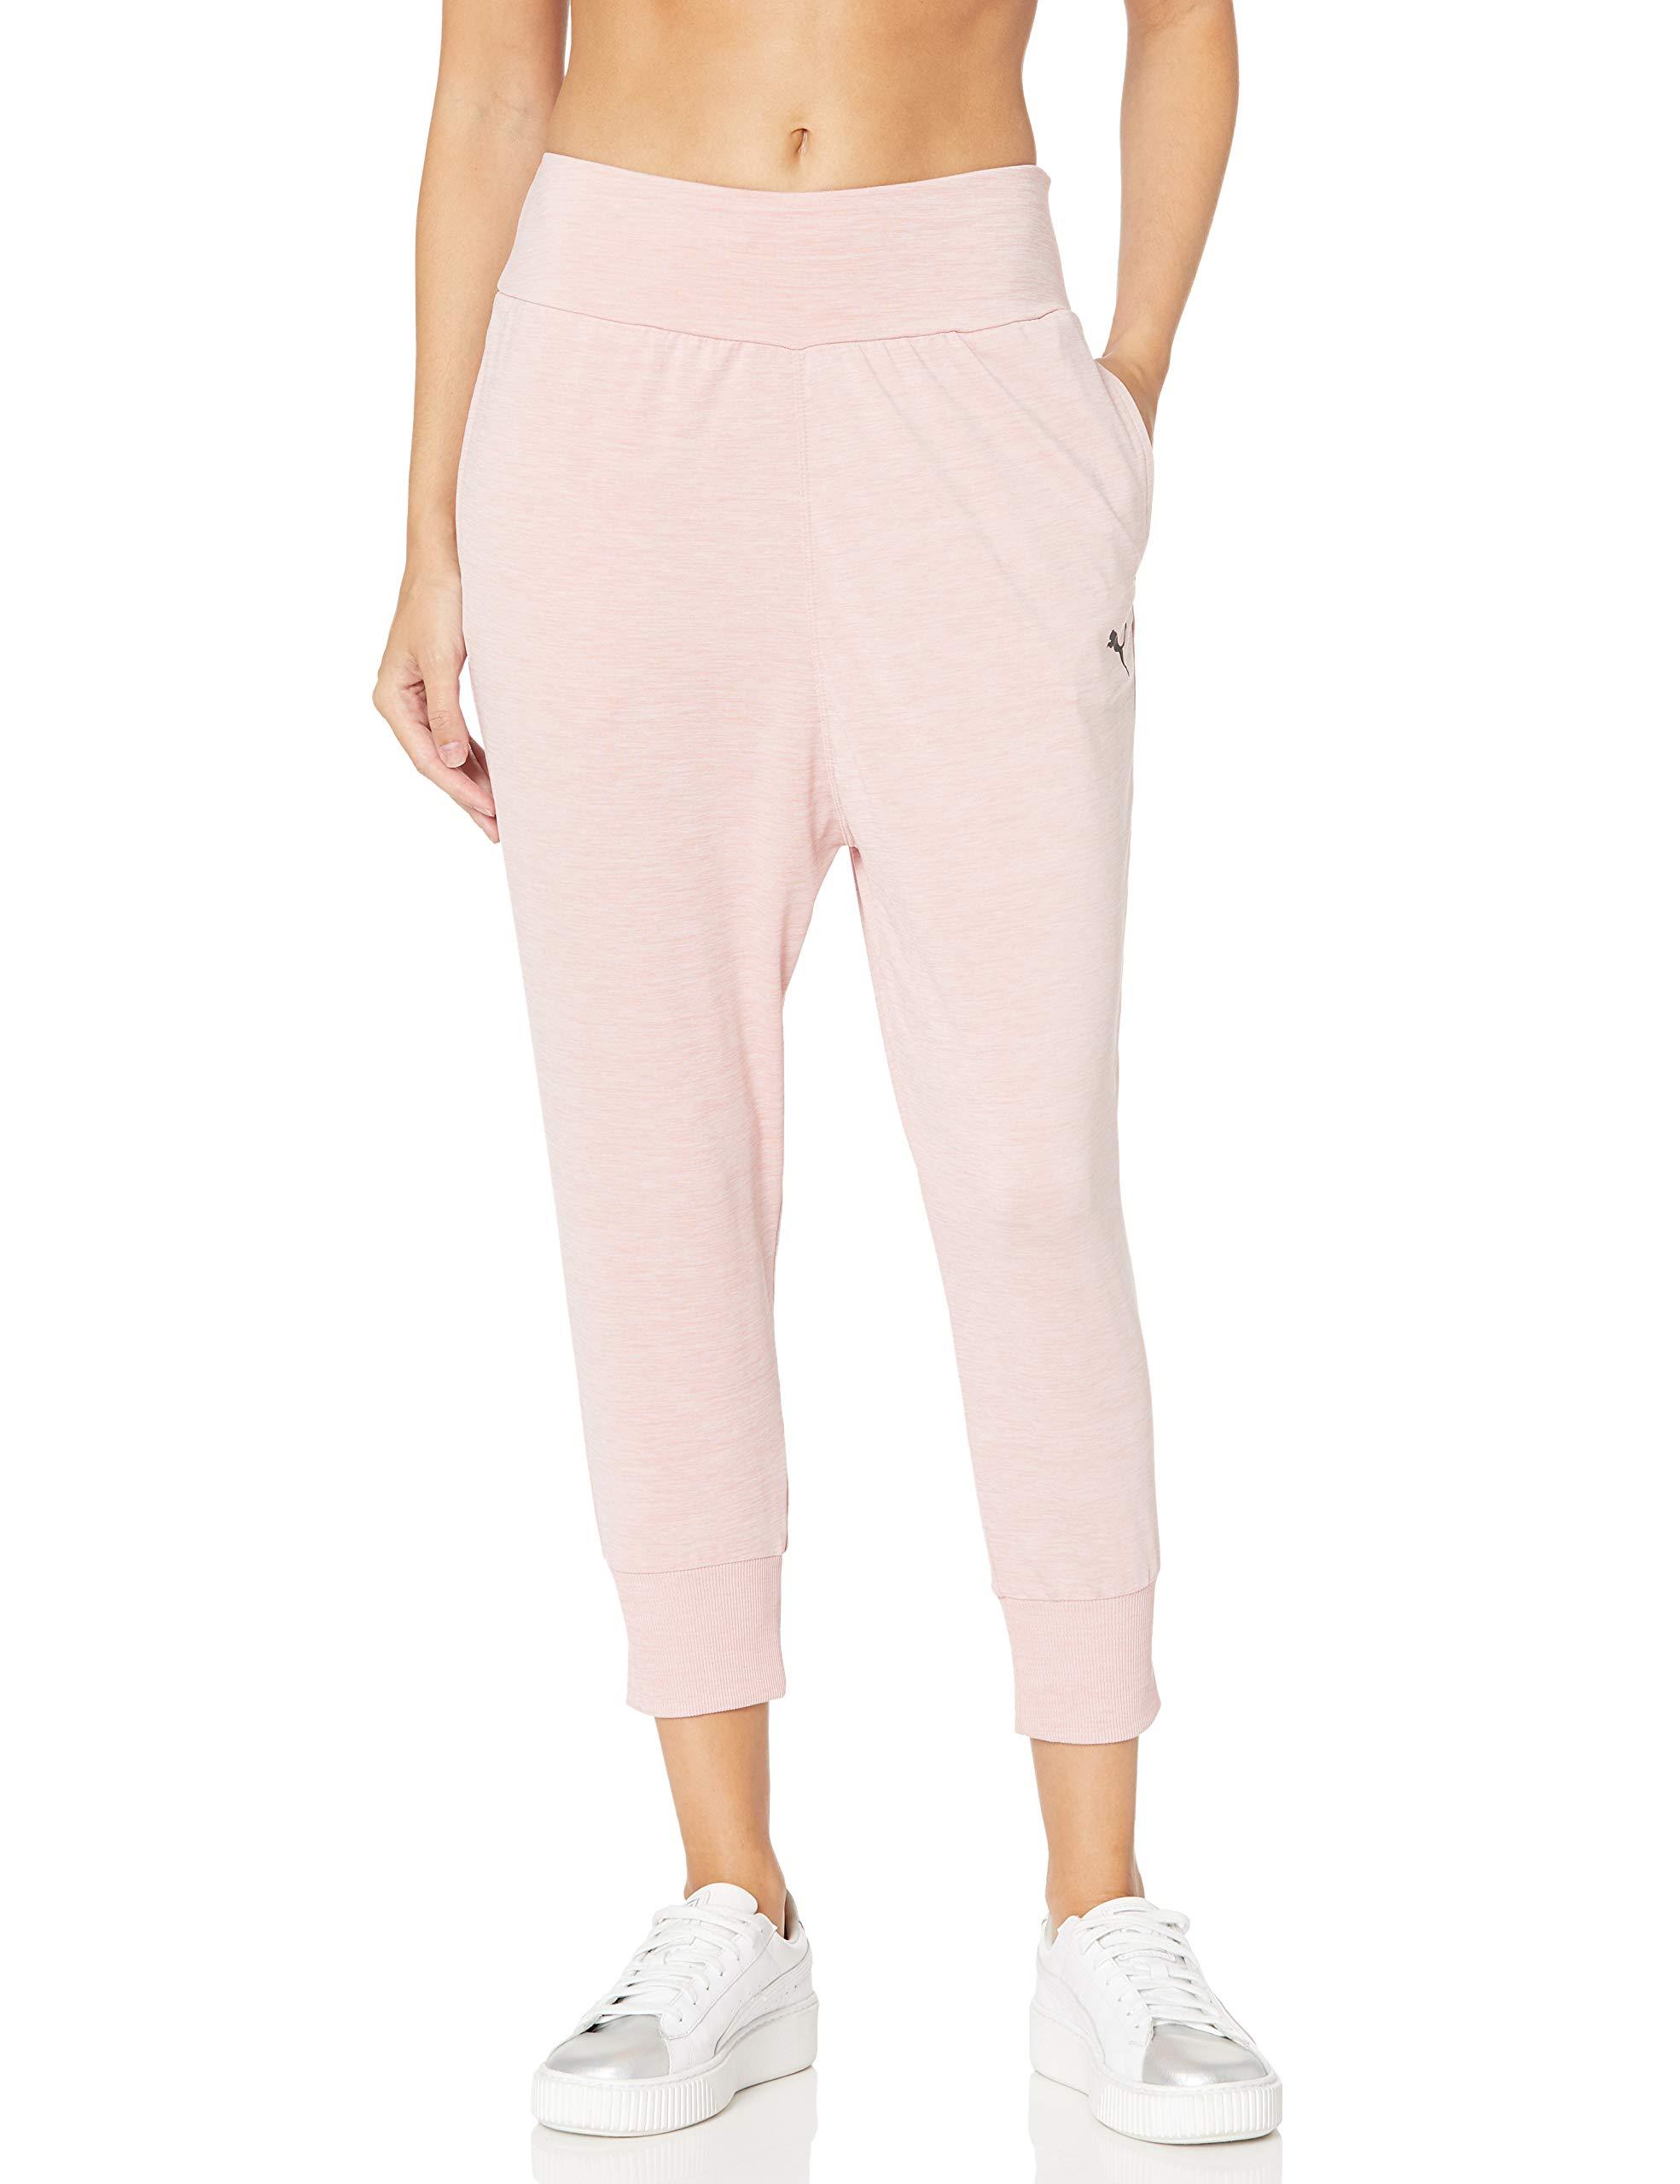 PUMA Synthetic Soft Sports Drapey Pants in Pink - Save 53% - Lyst